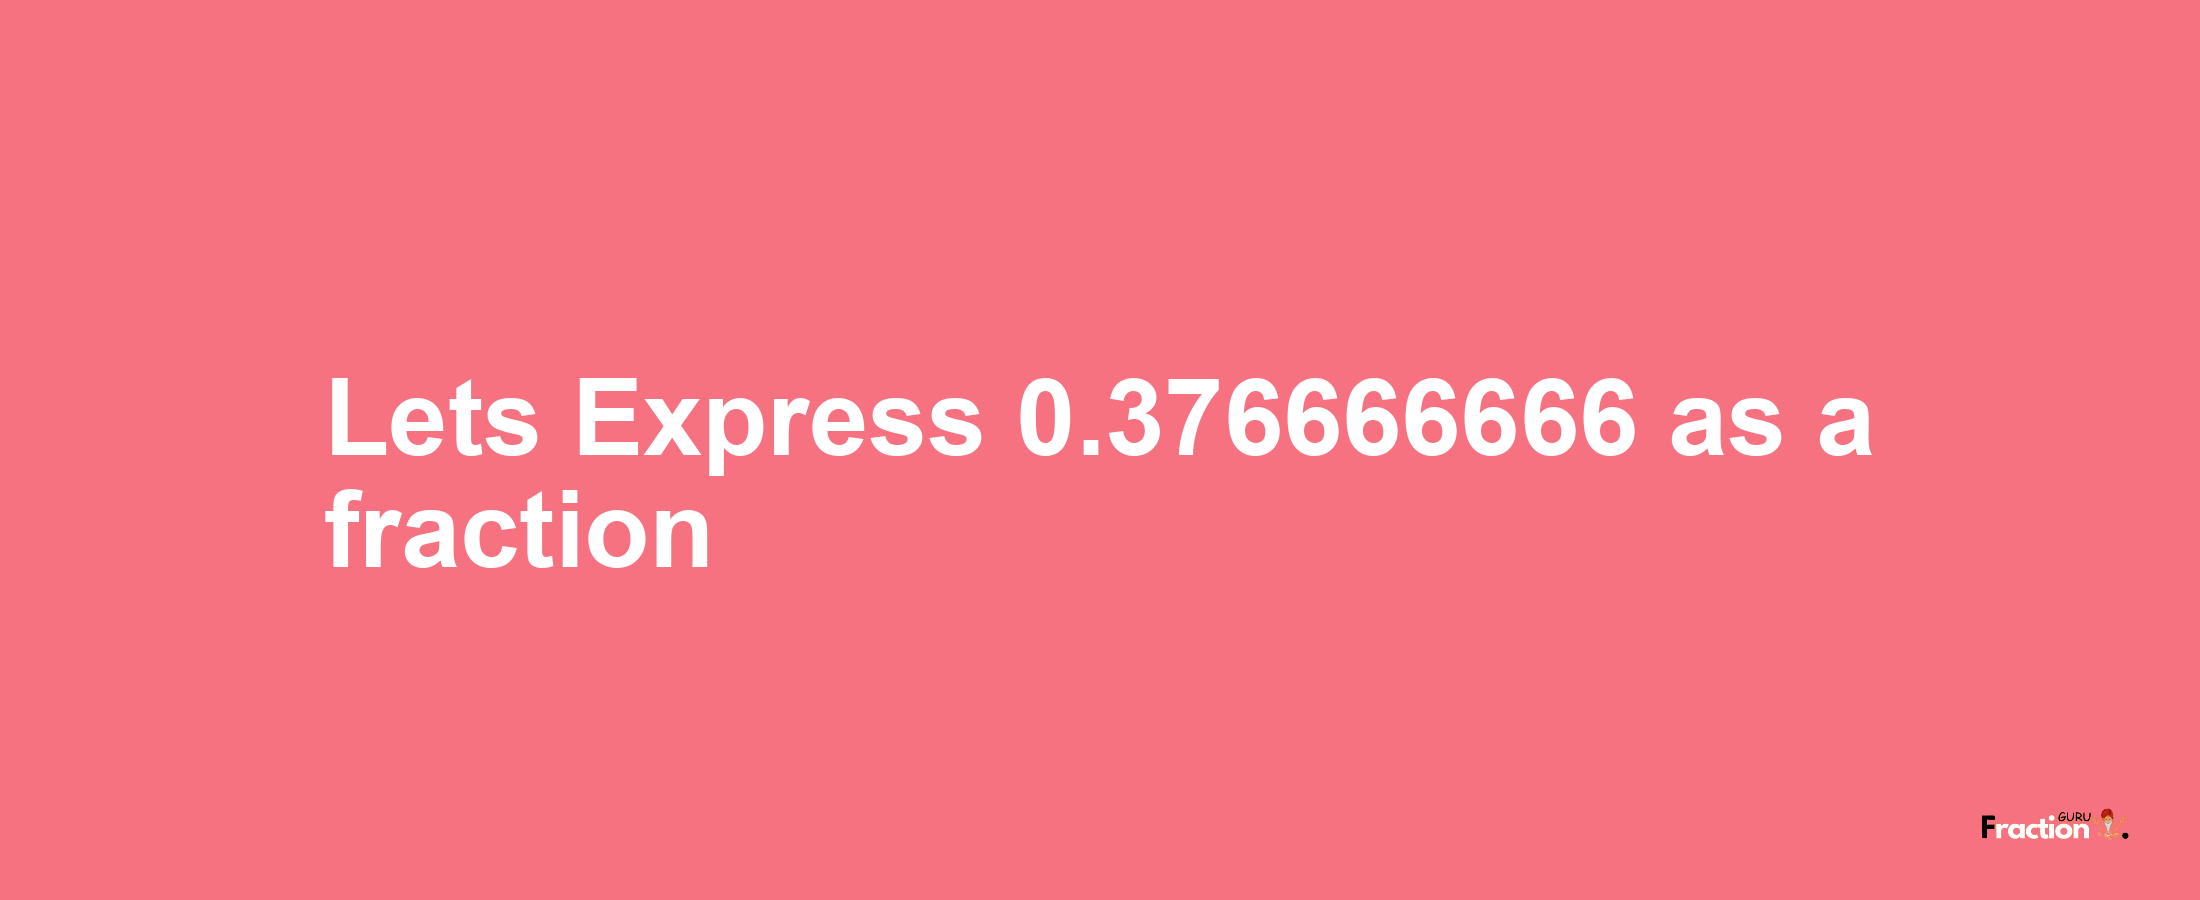 Lets Express 0.376666666 as afraction